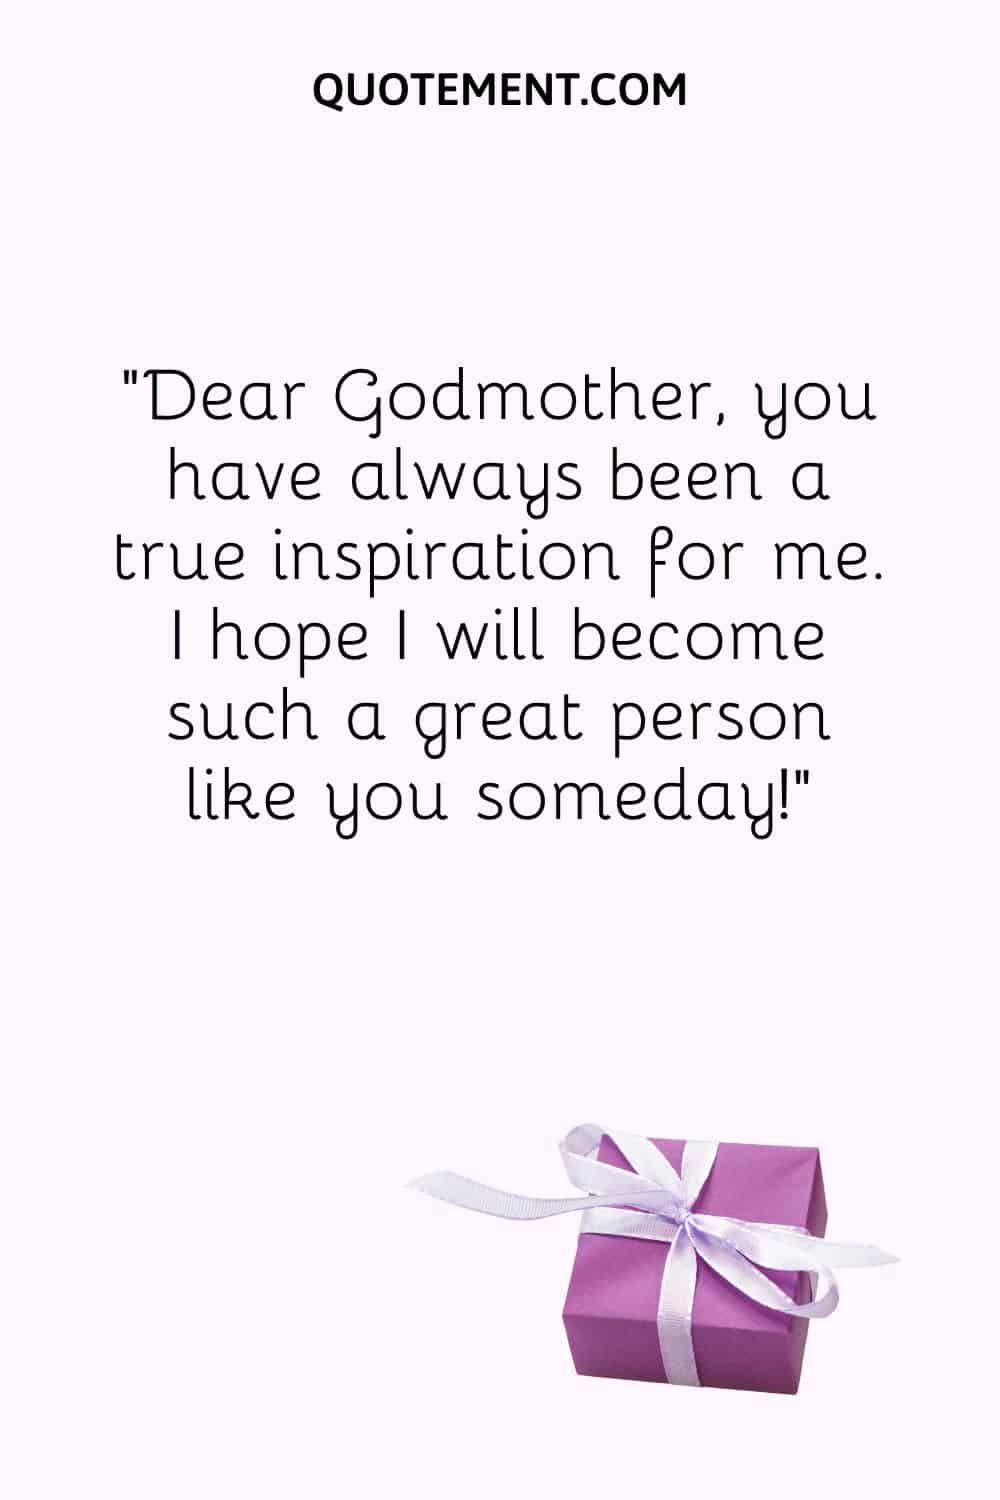 Dear Godmother, you have always been a true inspiration for me